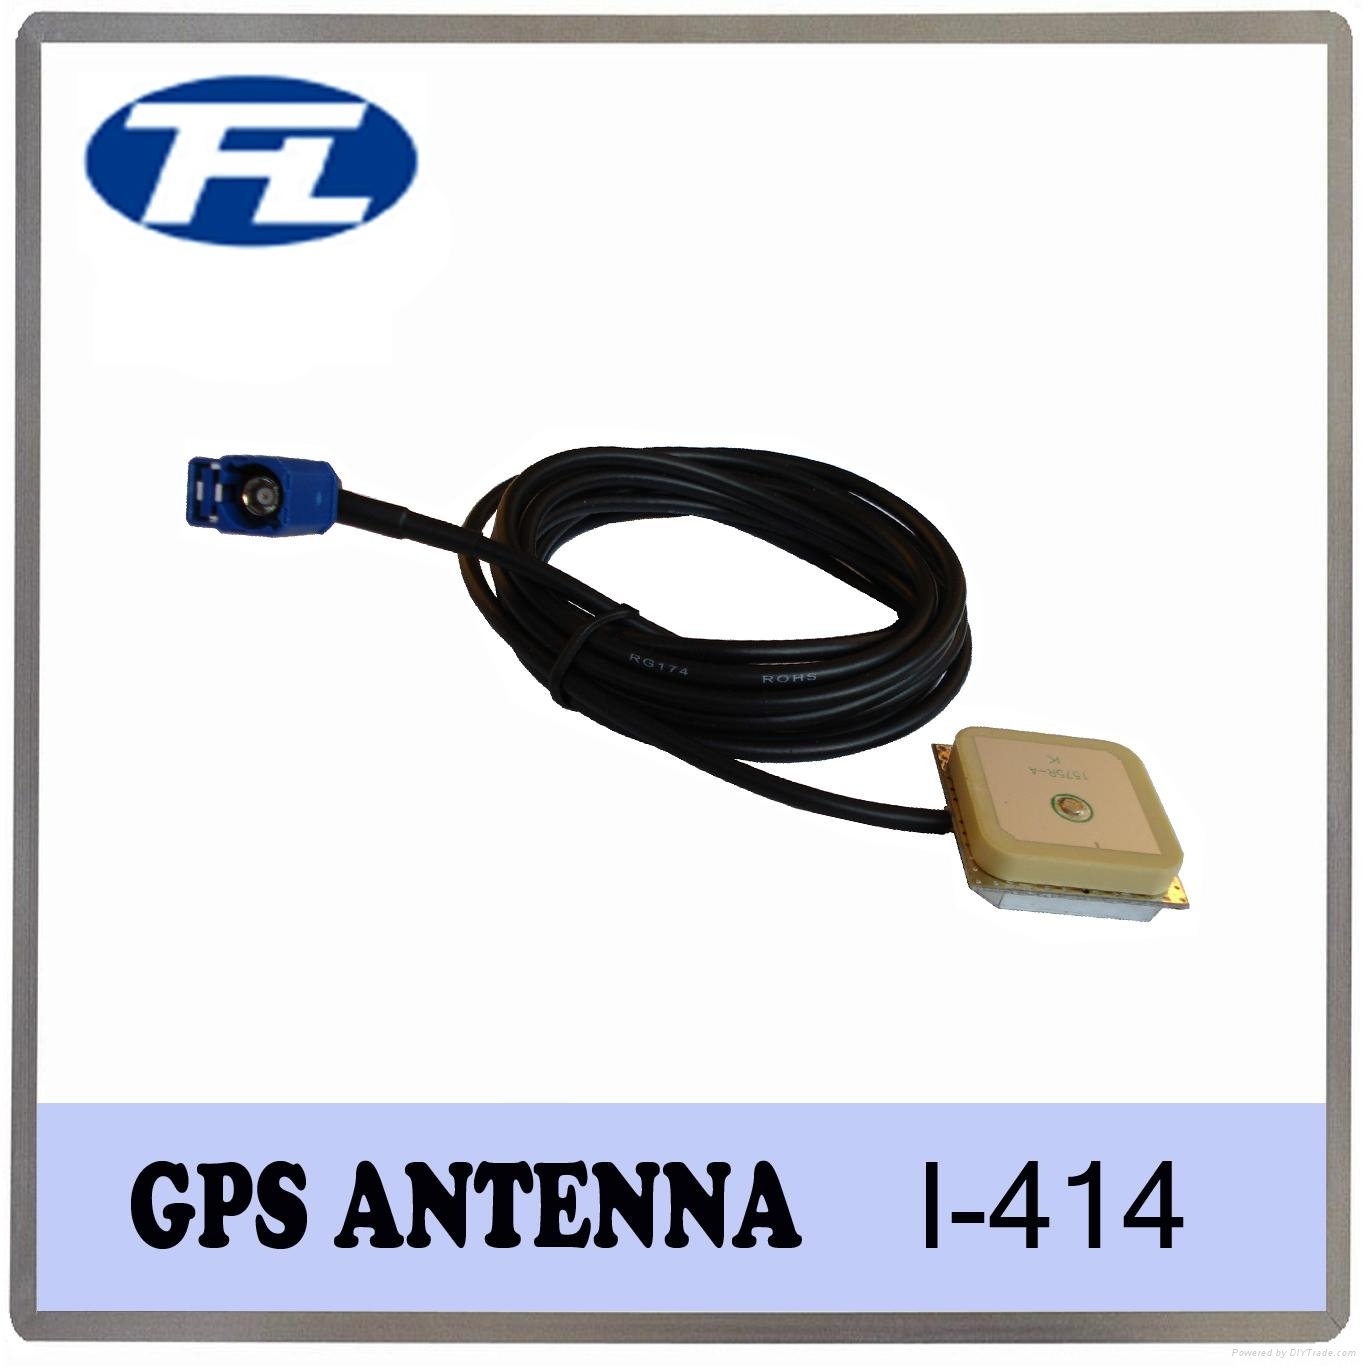 Embedded GPS Dielectric Antenna 5